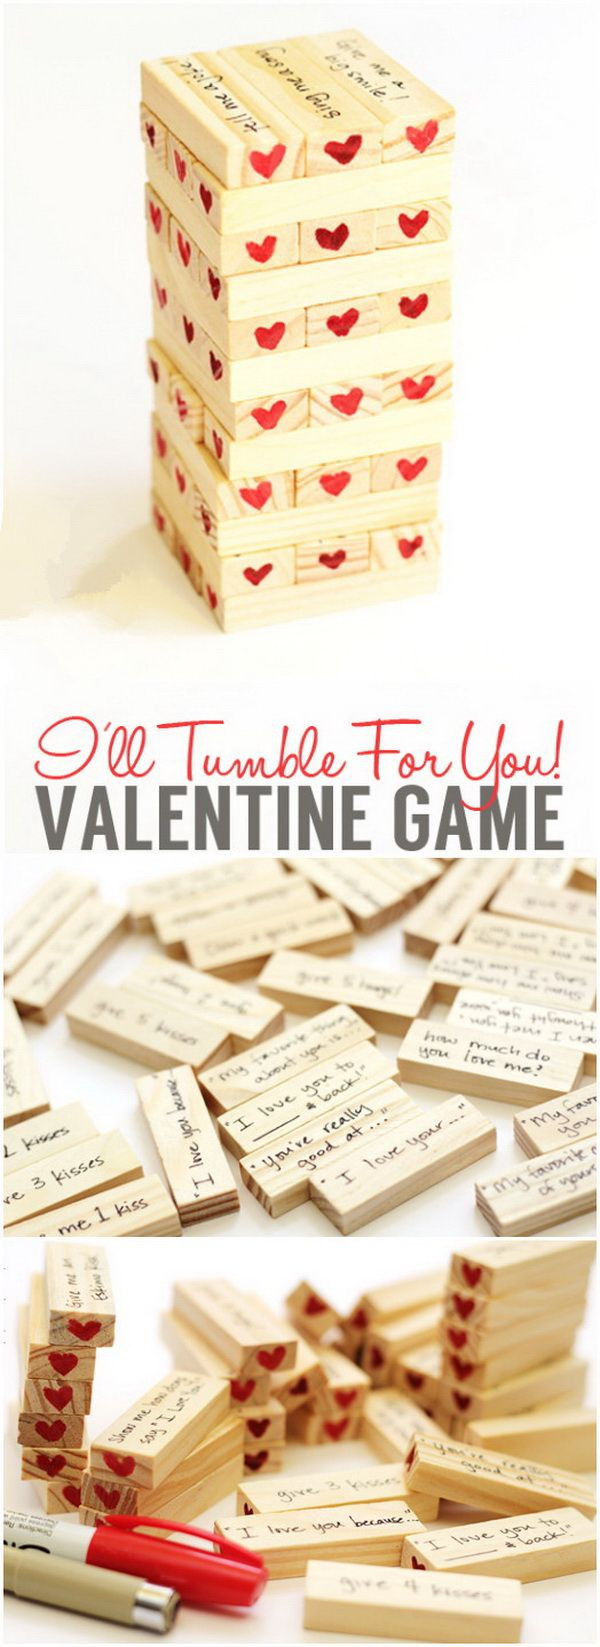 Valentine'S Day Gift Ideas For Boyfriend
 Valentine’s Day Hearty Tumble Game Another fun t idea